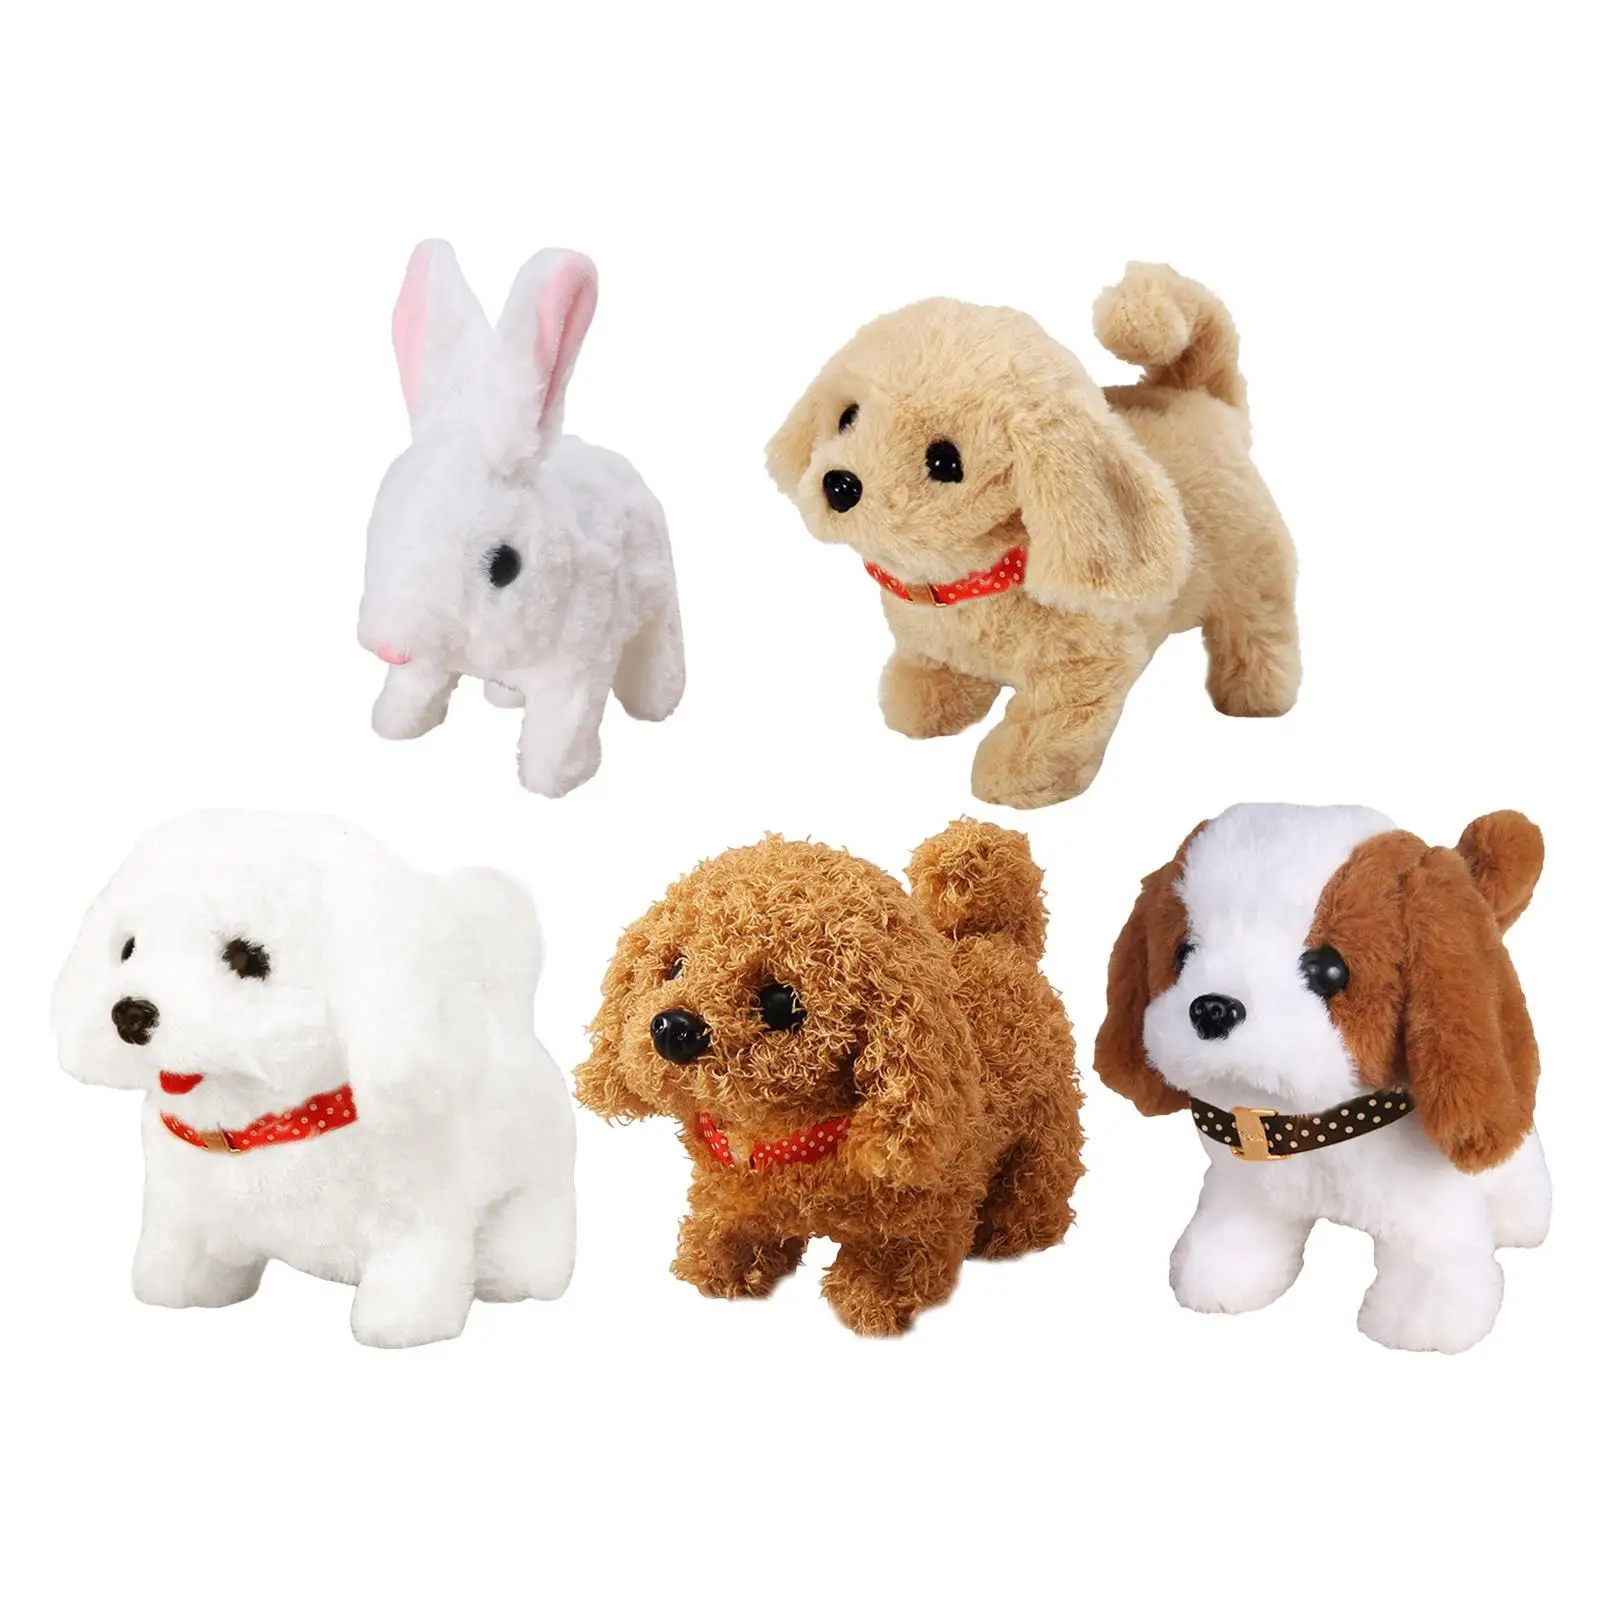 Simulation Electric Plush Animals Toy with Sound Toy Interactive Animal Toy Stuffed Animal Plush Toy for Girls Birthday Gifts